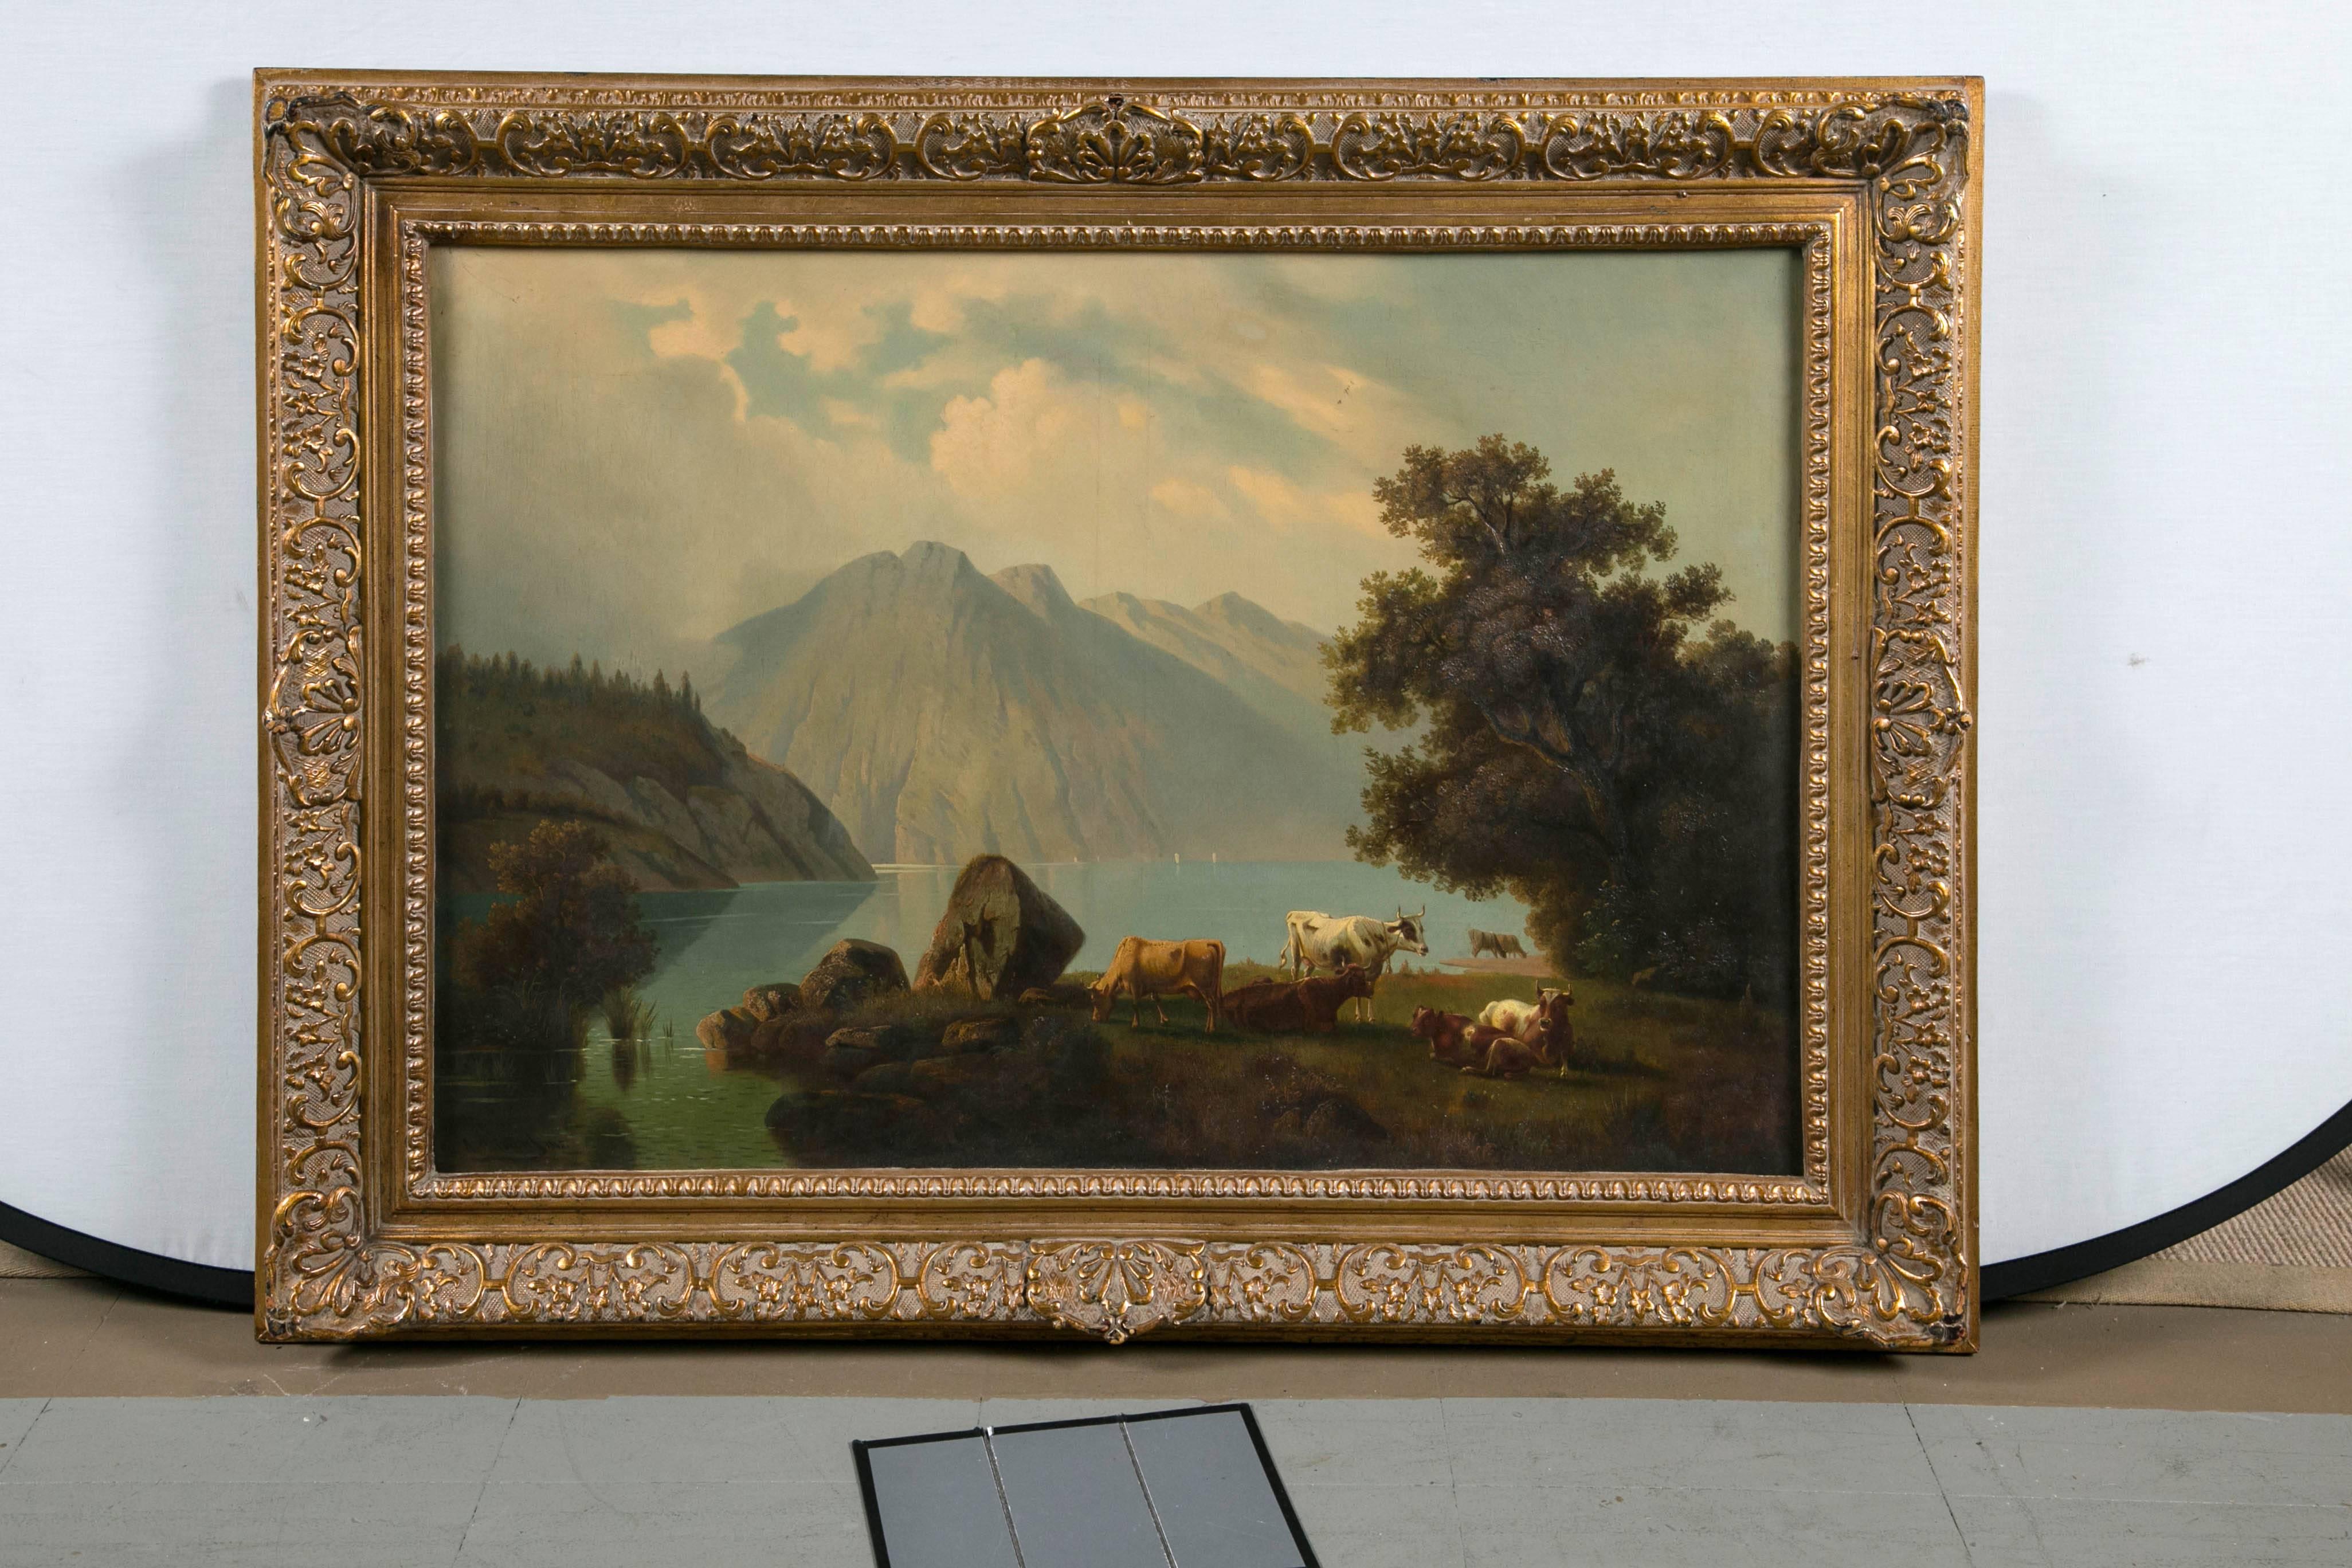 A very fine 19th century oil on canvas in extremely fine detail depicting a lush landscape with lifelike cows. Signed (illegible) in an antique gilded frame.